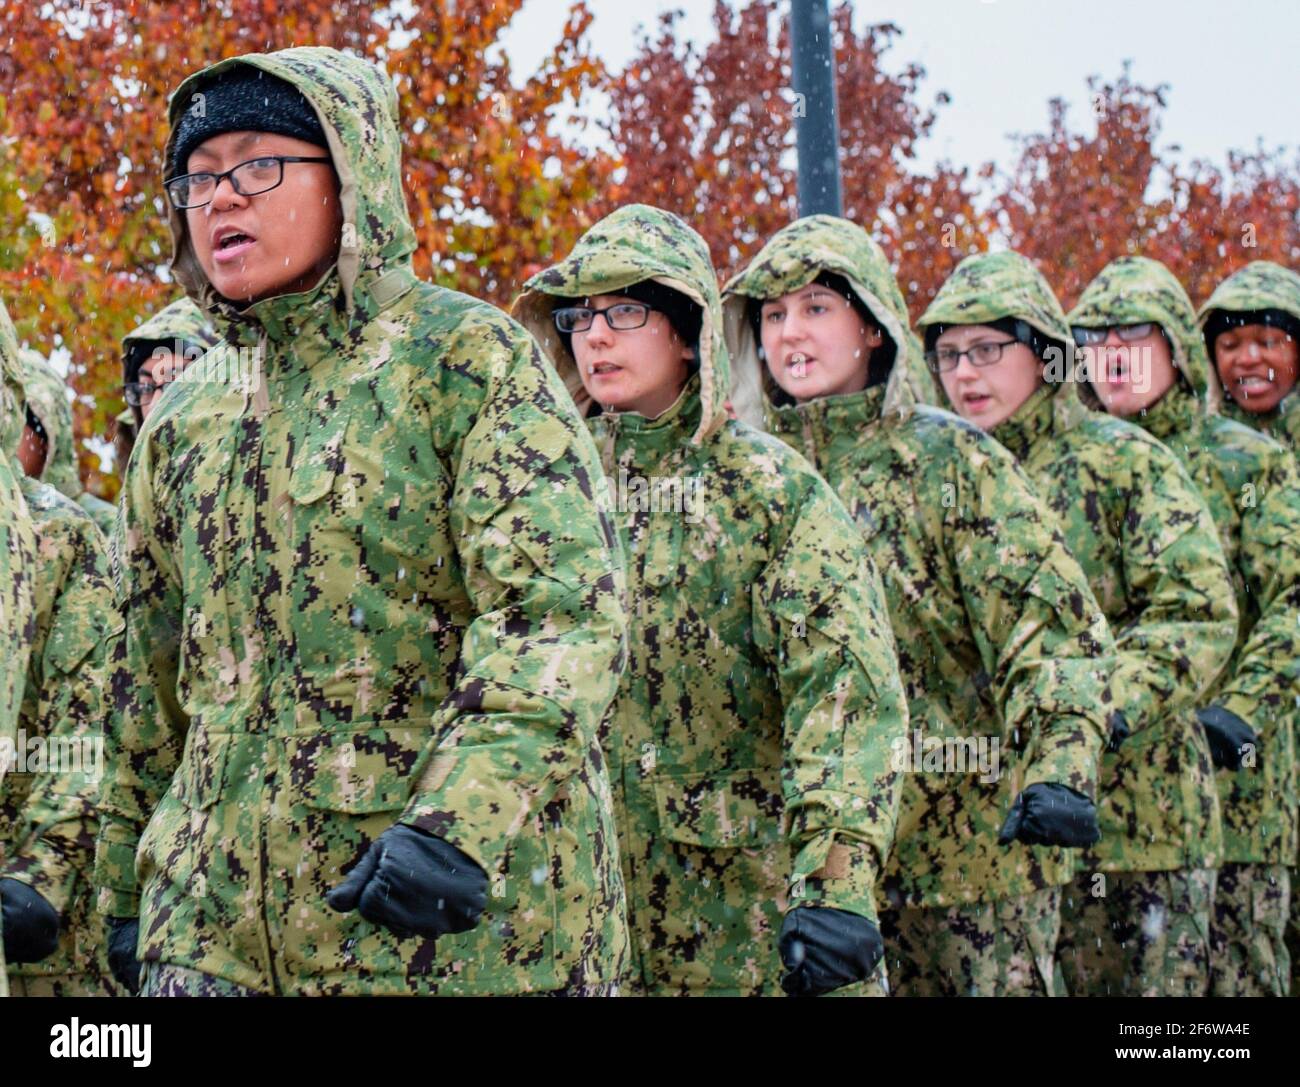 GREAT LAKES, Ill. (Nov. 15, 2018) Recruits march in formation at Recruit Training Command. More than 30,000 recruits graduate annually from the Stock Photo